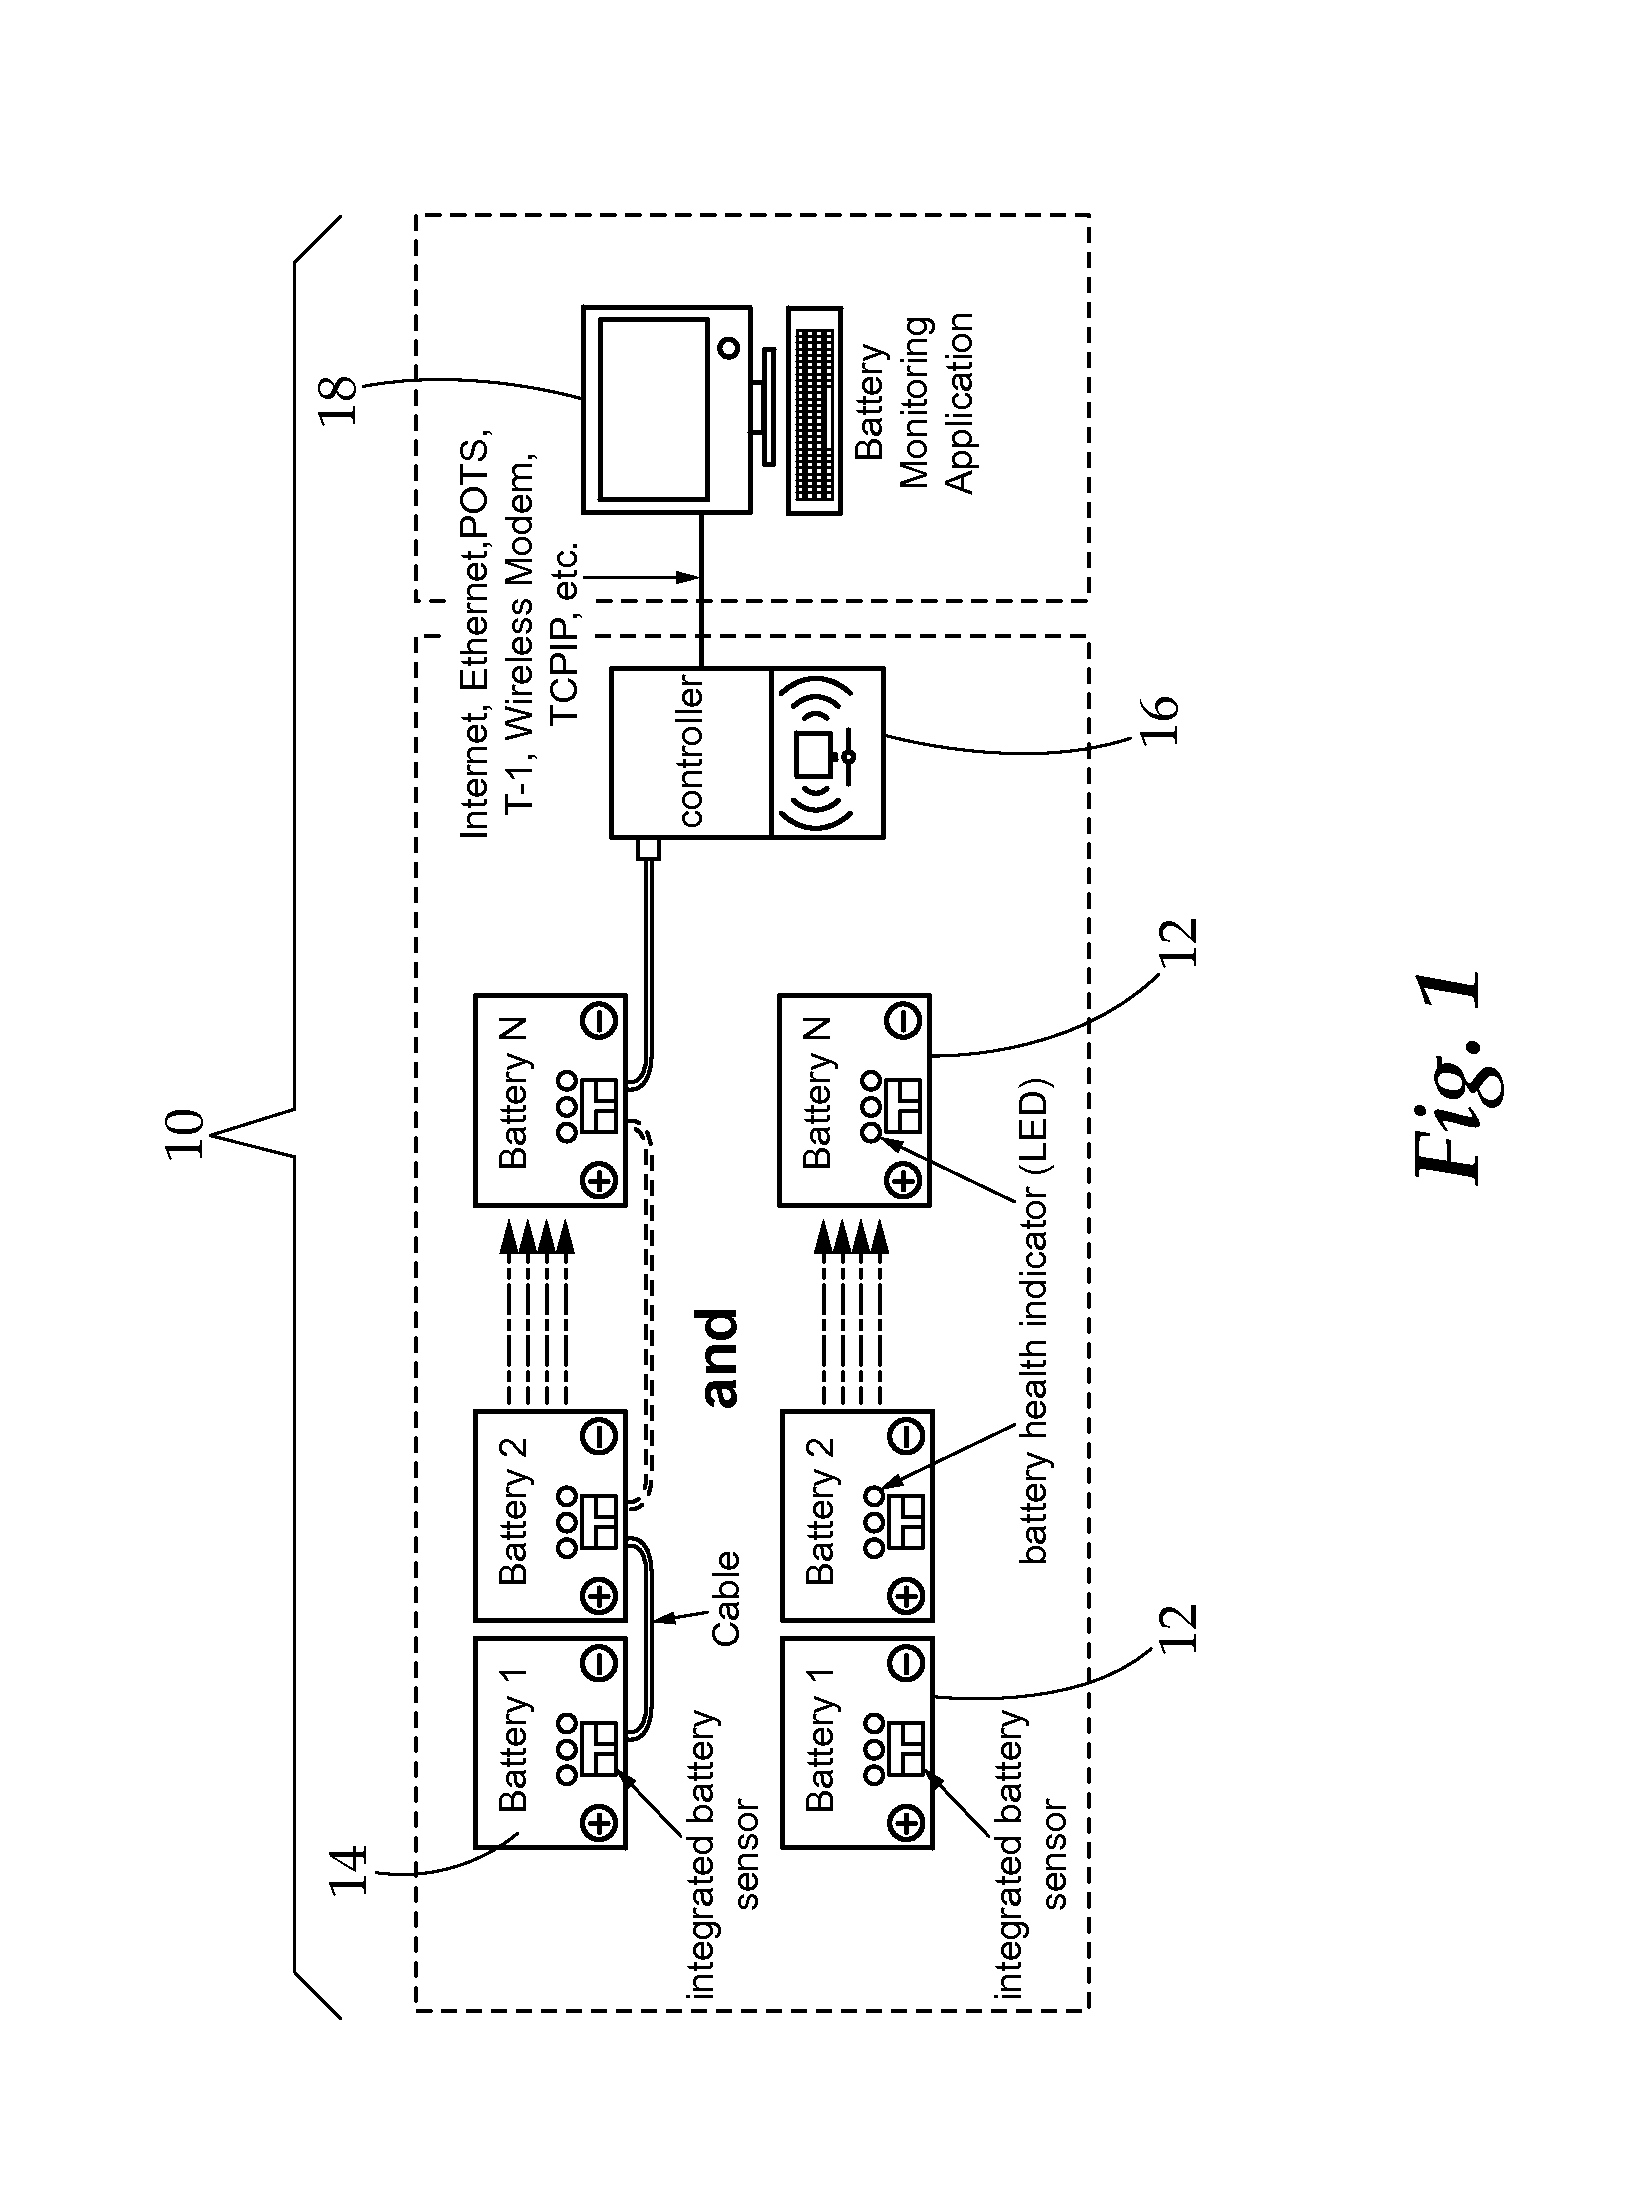 Integrated Intelligent Battery Management System and Monitoring System